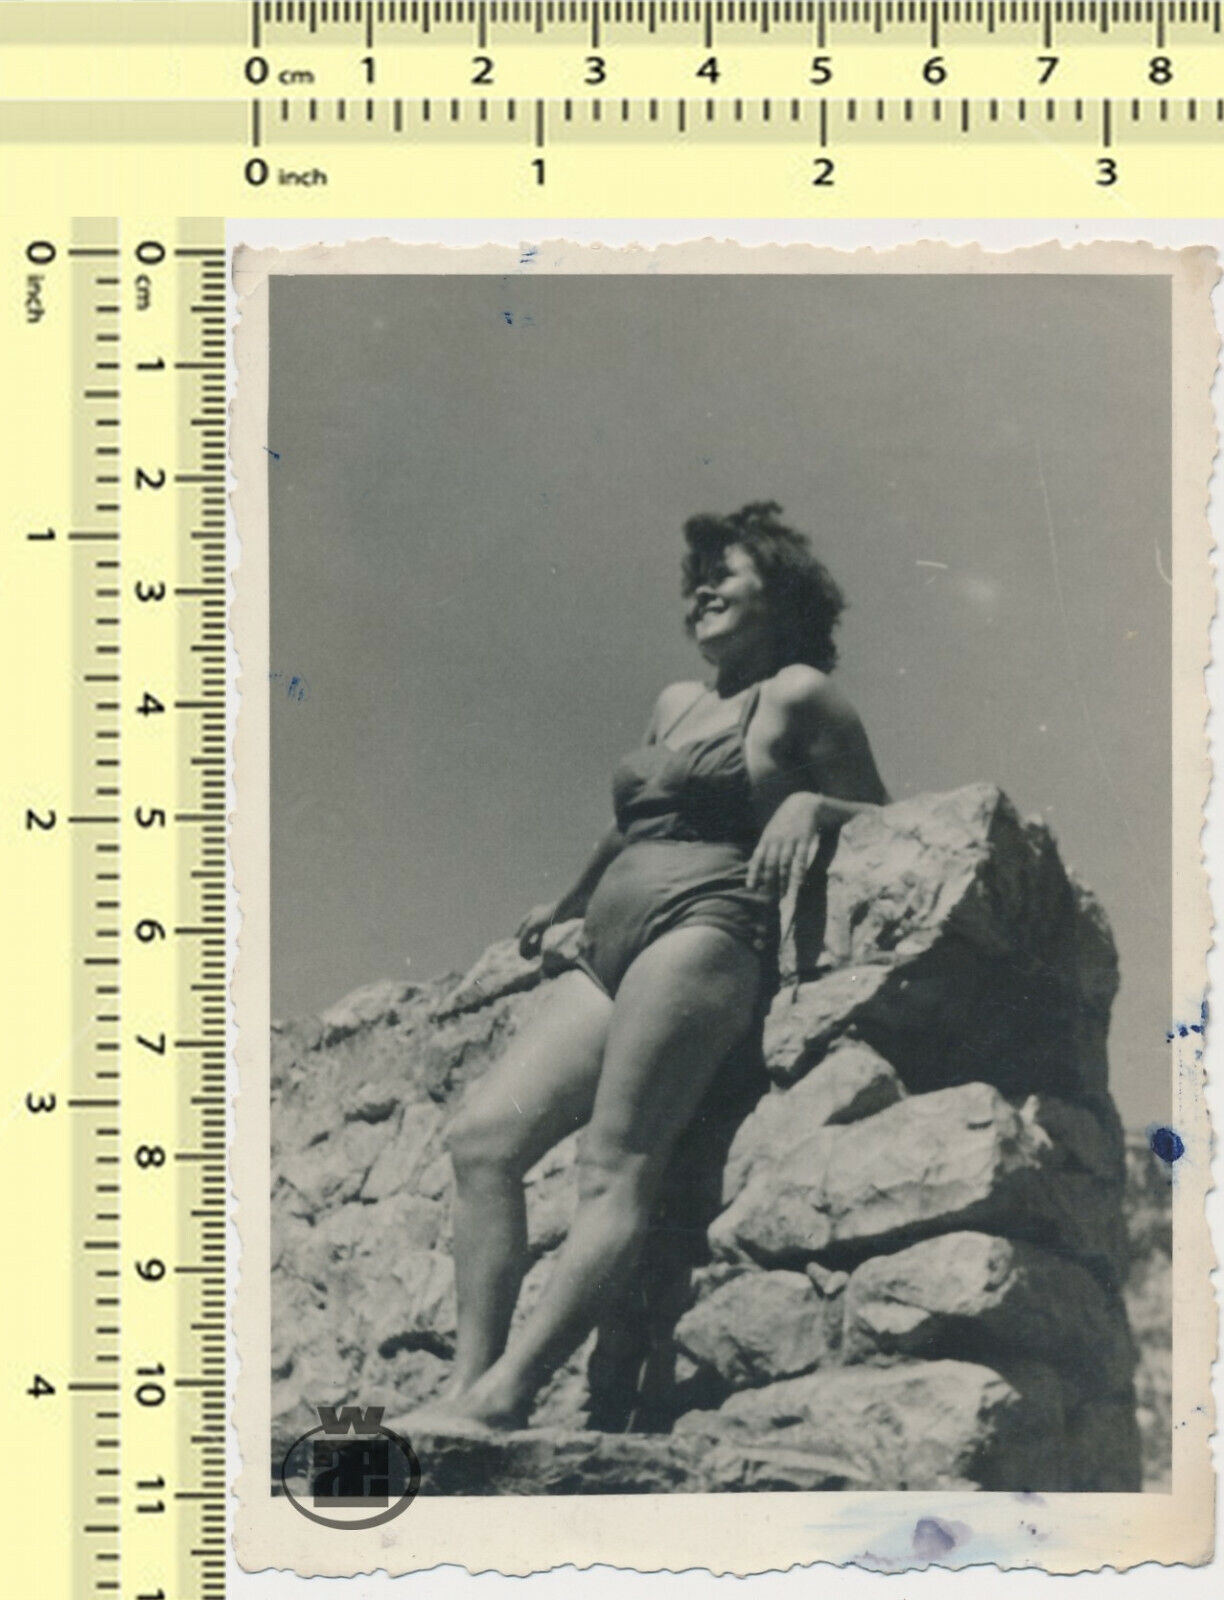 088 Swimsuit Woman Smiling Abstract Swimwear Lady Beach Portrait vintage photo